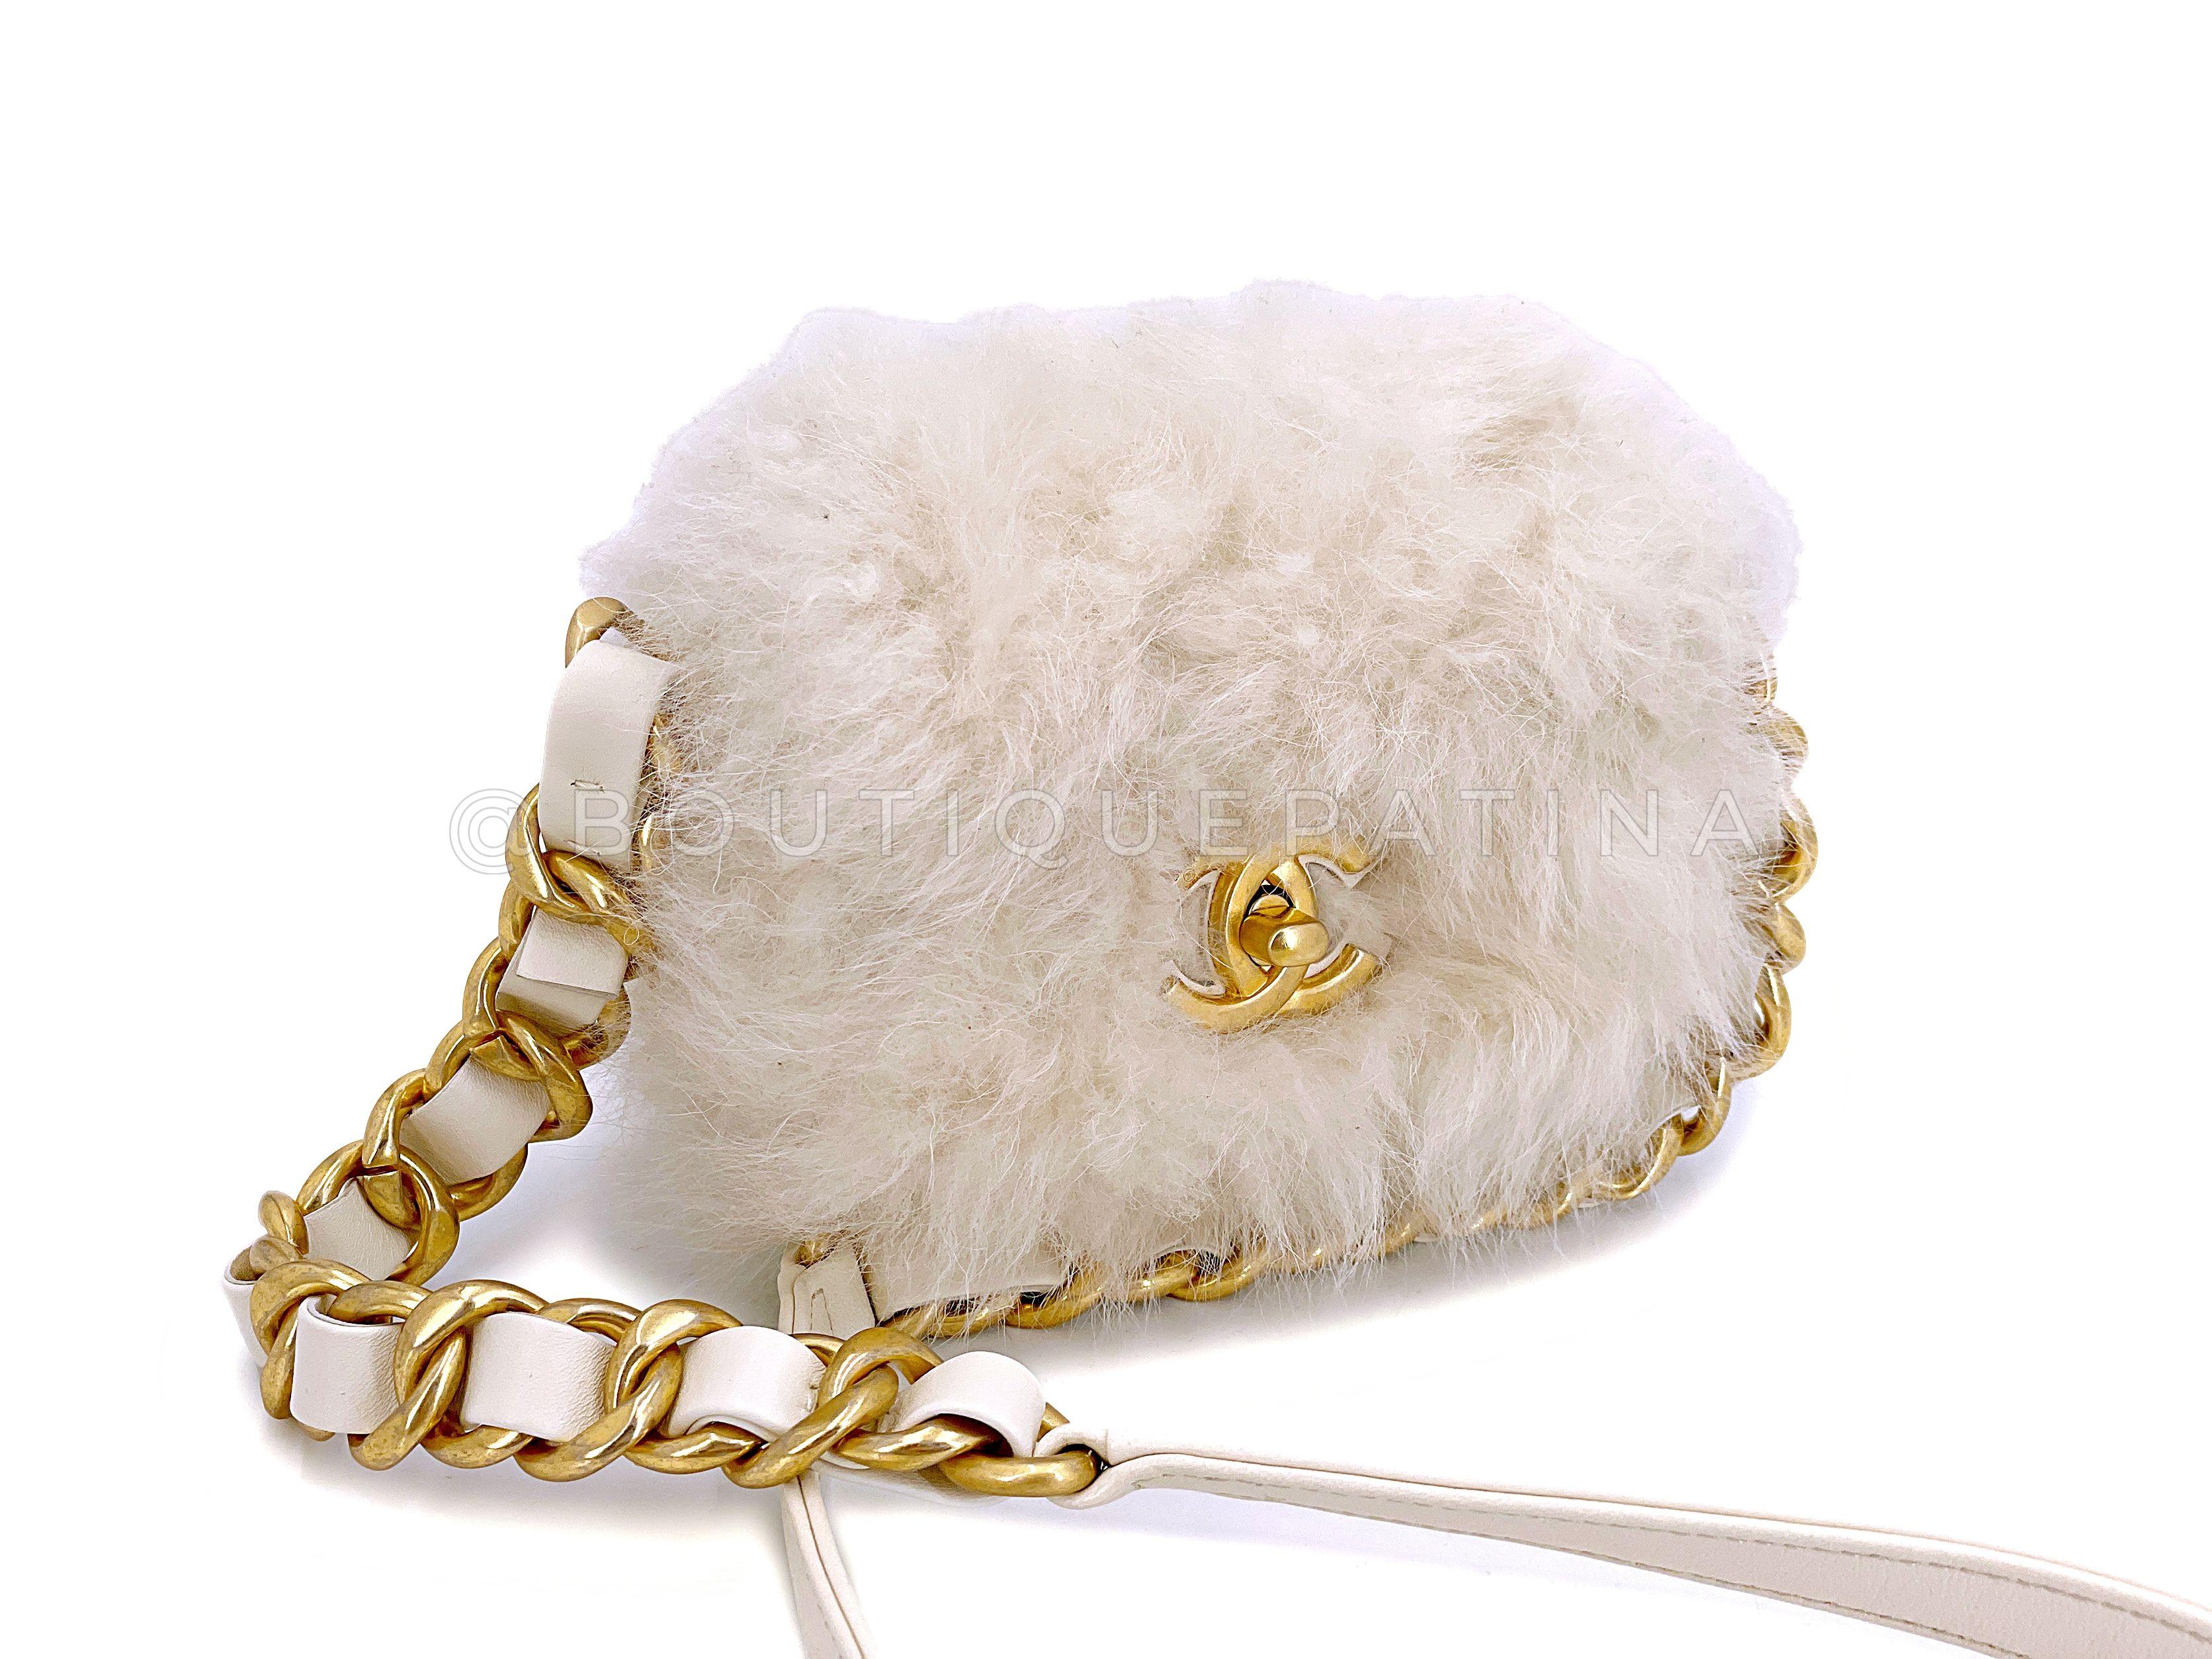 Store item: 67242

We love Chanel White Ivory Fur Mini Crossbody Flap Bag Chunky Chain  not only because it's chic and seasonal - but it's environmentally friendly with faux fur. The chunky woven chain strap in brushed gold hardware goes so well